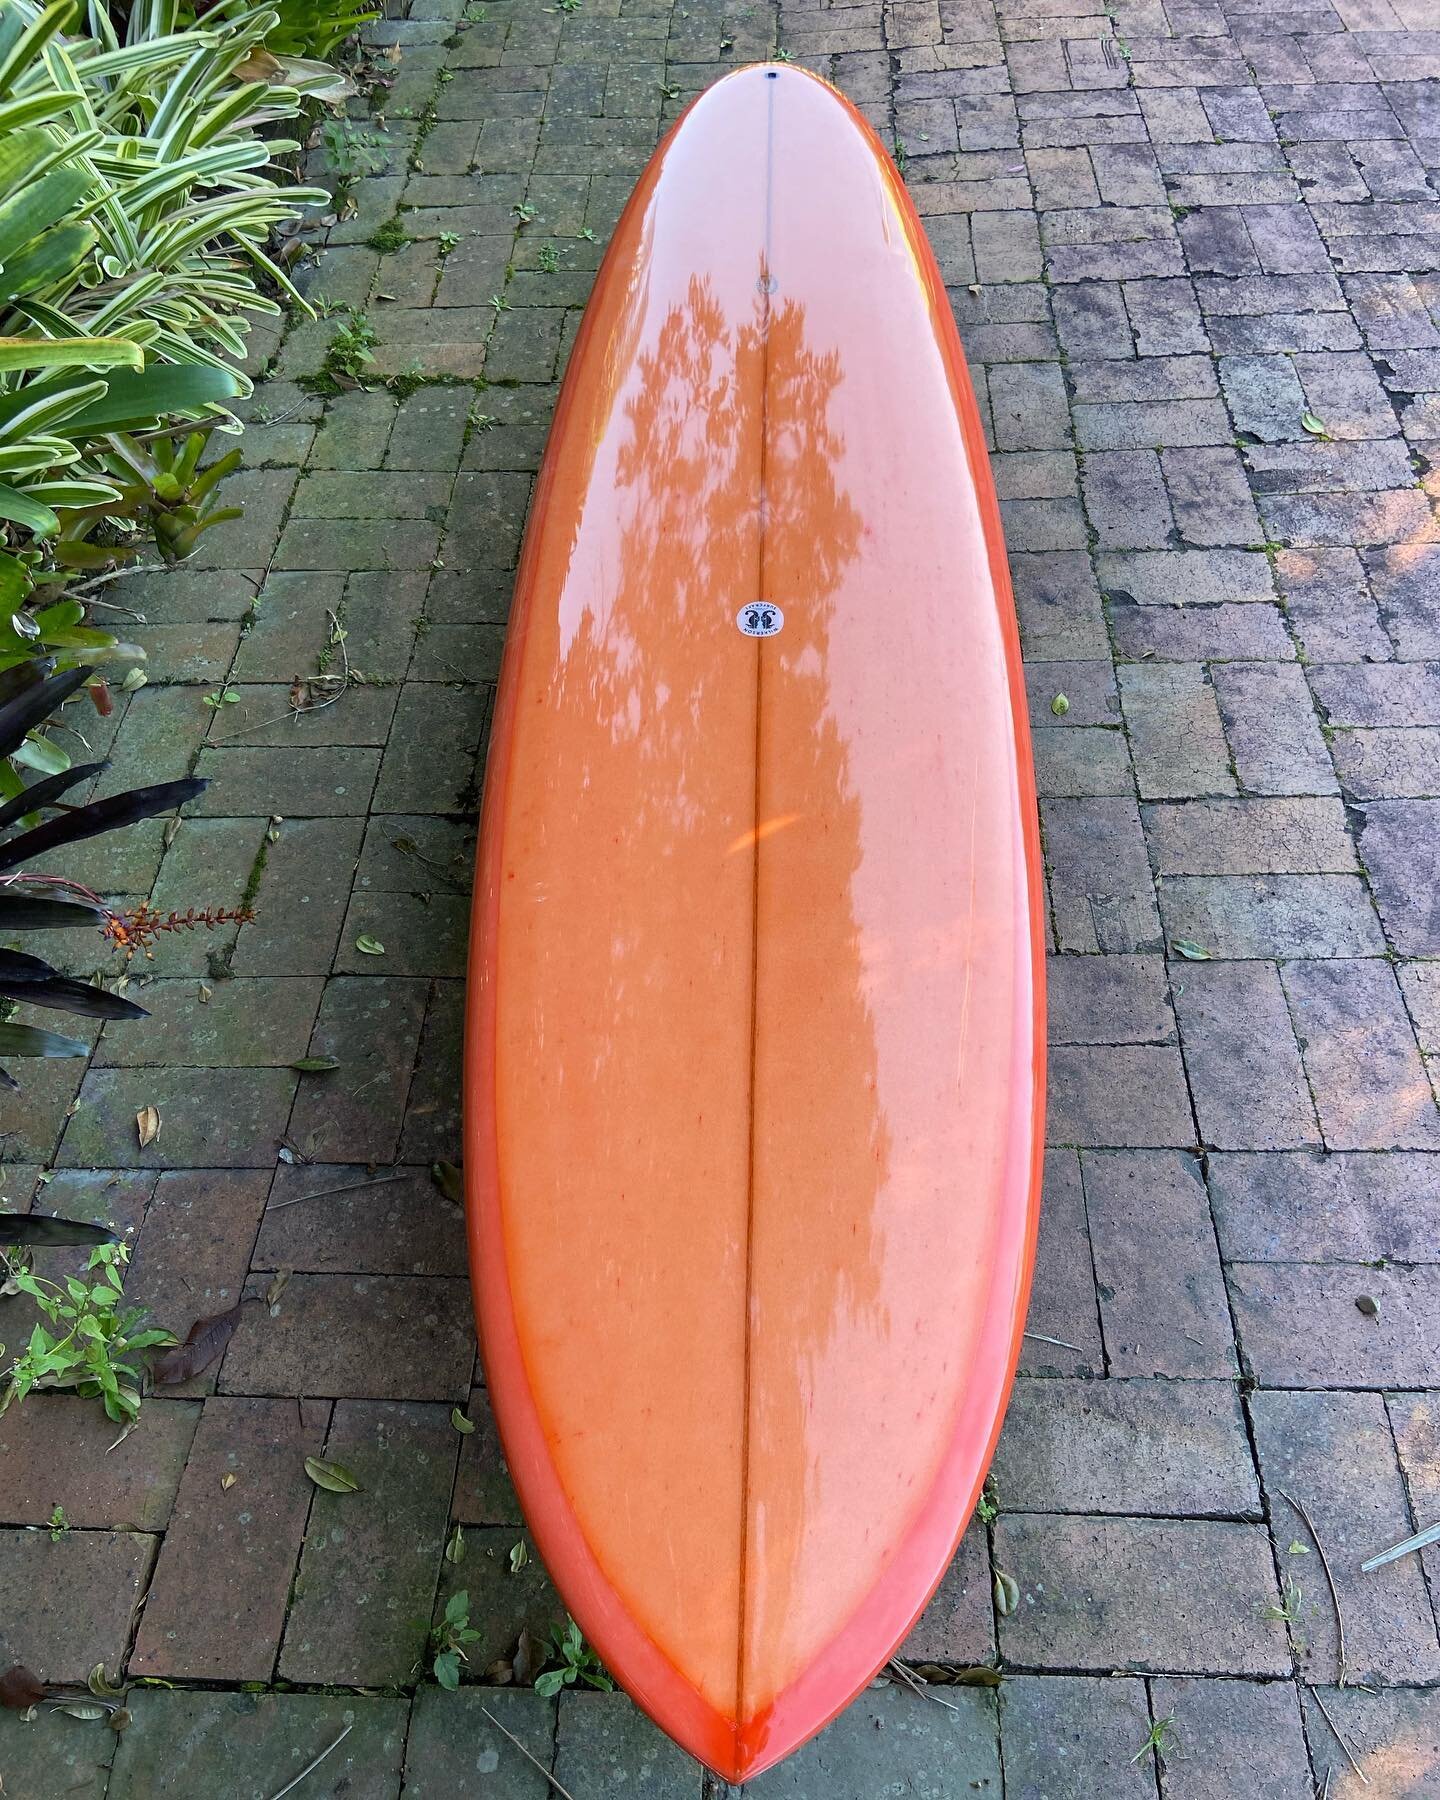 7&rsquo;6&rdquo; custom For @teddyclifford  this board features a progressive rocker, flat entry to vee off the tail with 4 channels combined with twin fin set up.  Super fun design &ldquo;the mind can heal&rdquo;  Glassed in orange tint and glossed 